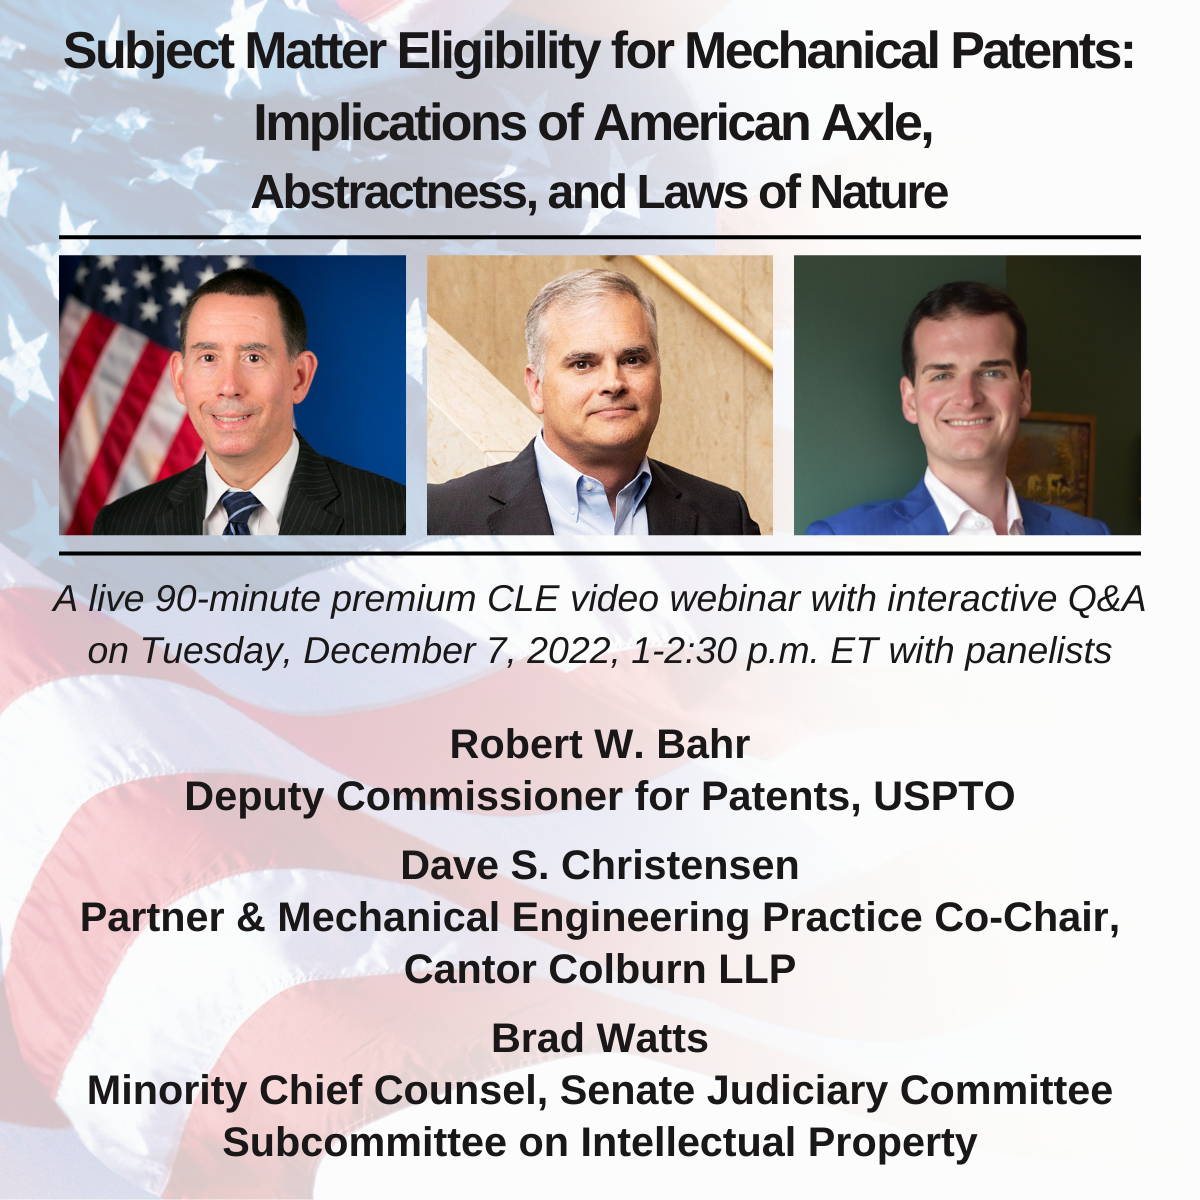 Subject Matter Eligibility for Mechanical Patents Webinar 